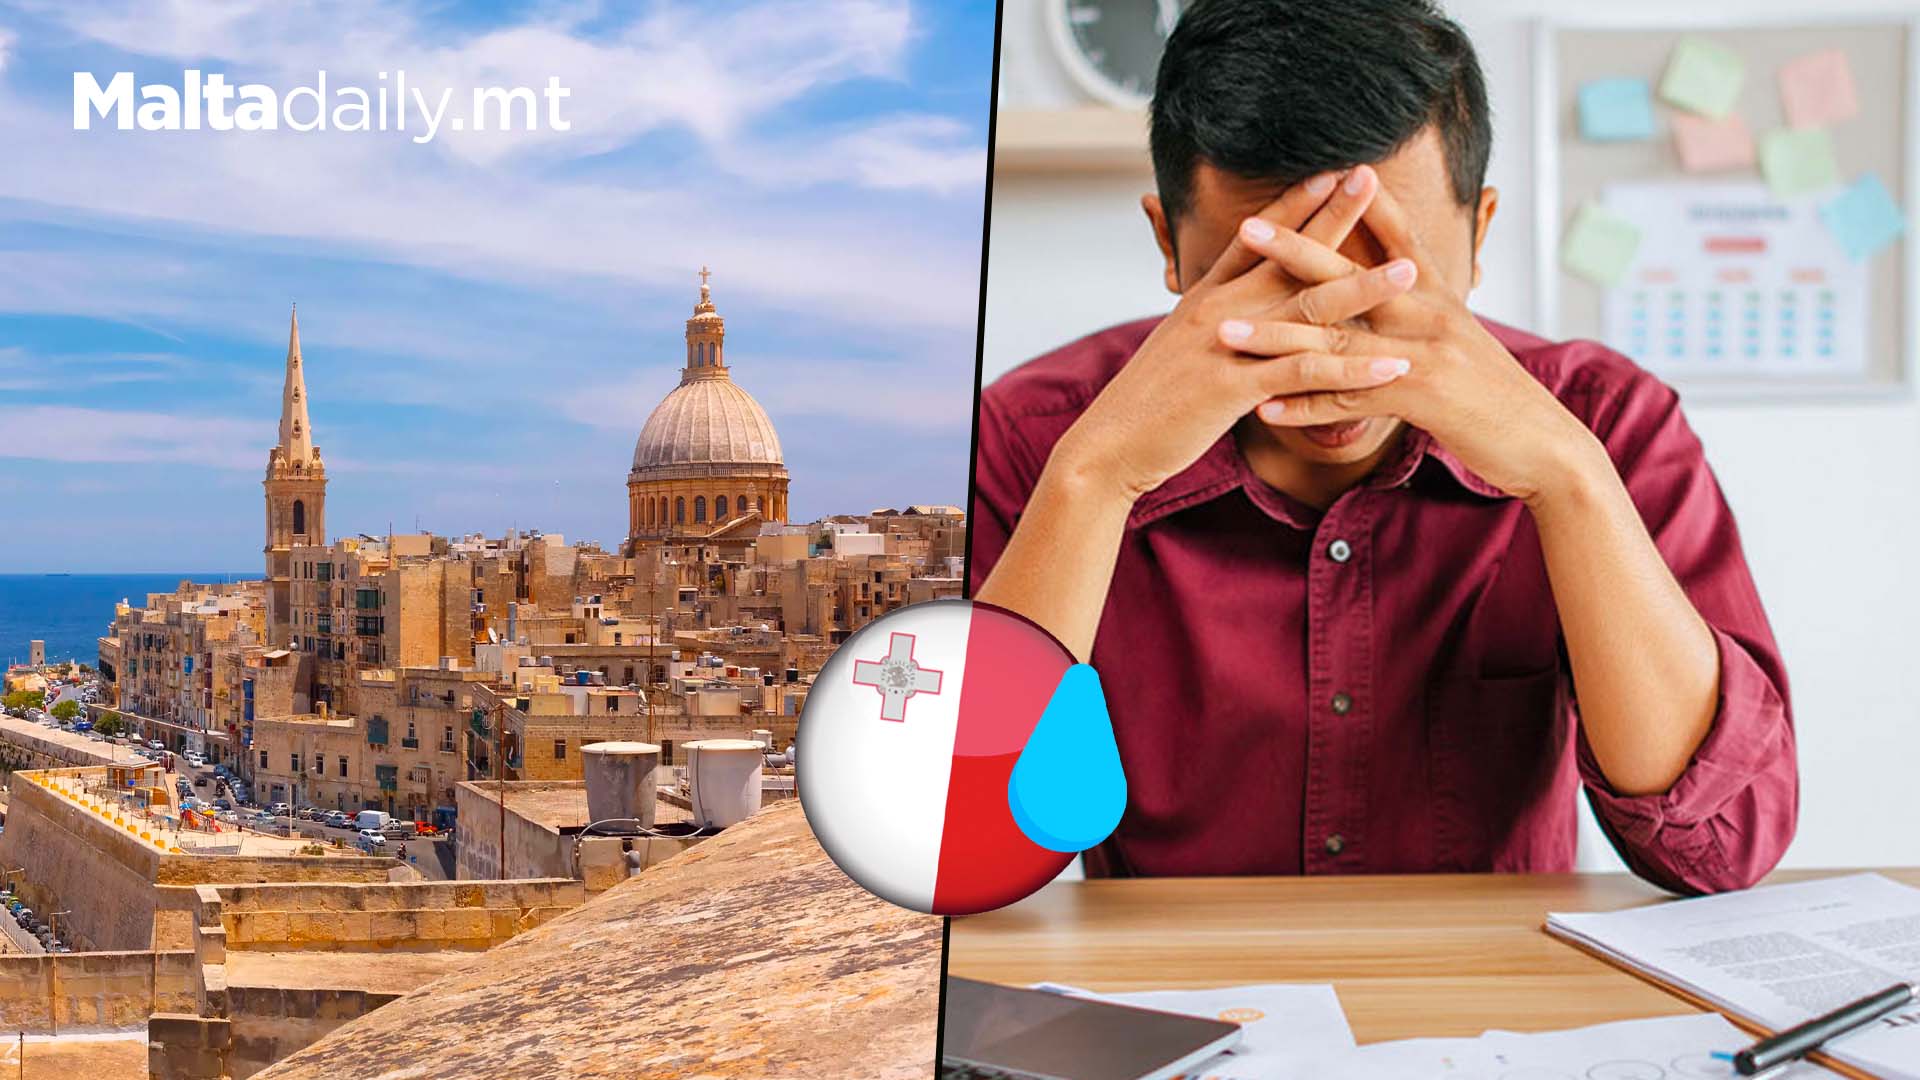 Malta 4th Most Stressed European Country, Study Finds